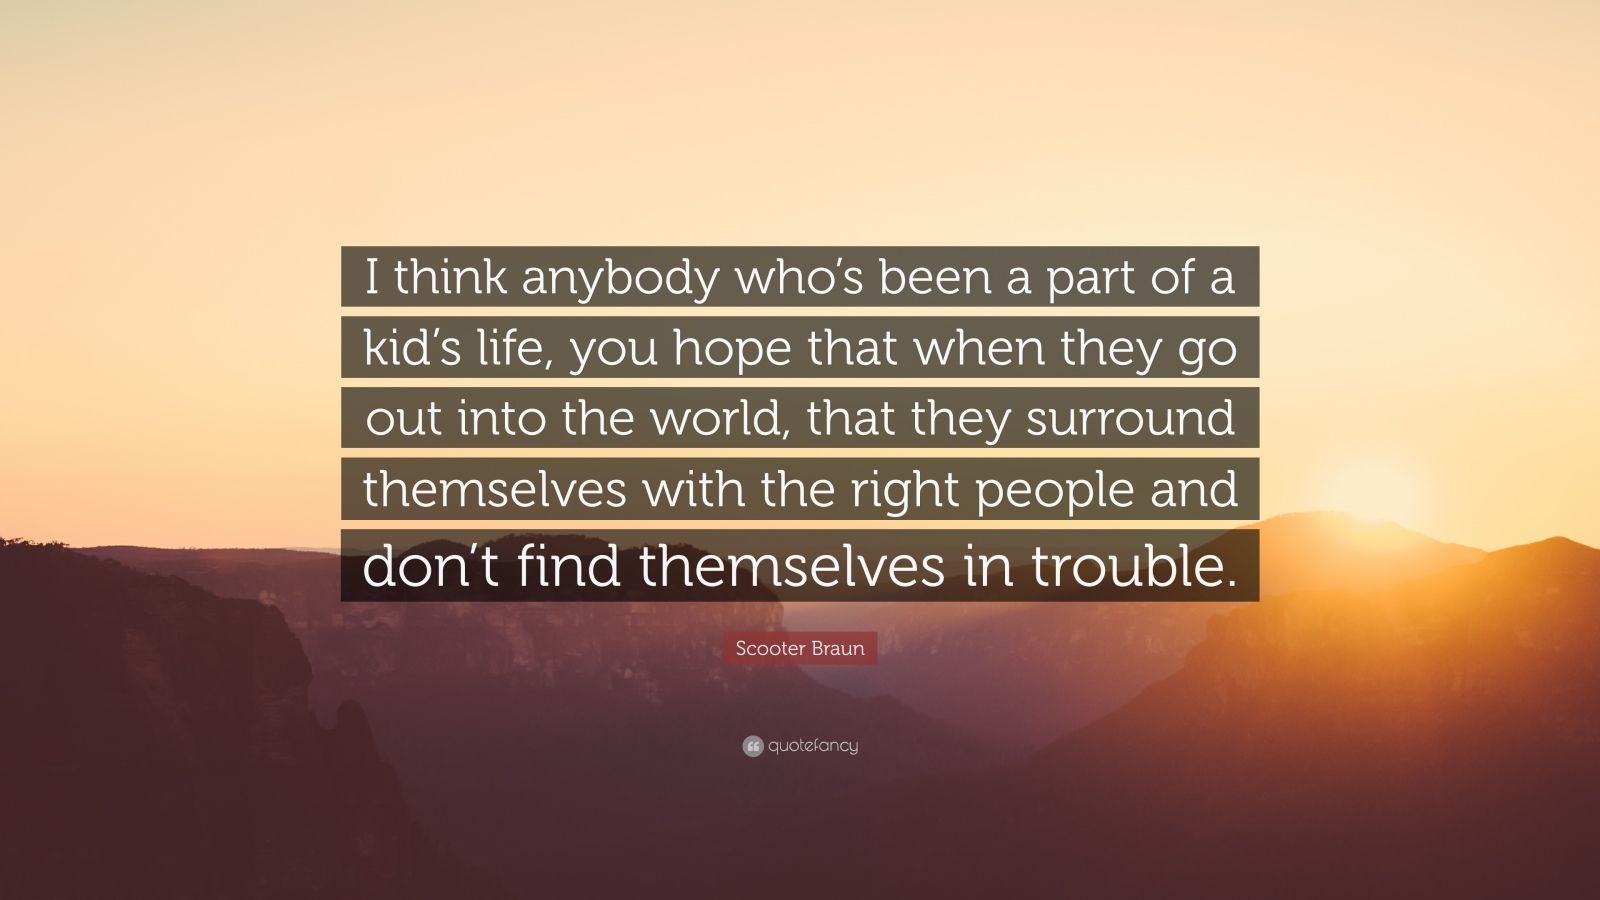 Scooter Braun Quote: "I think anybody who's been a part of a kid's life, you hope that when they ...